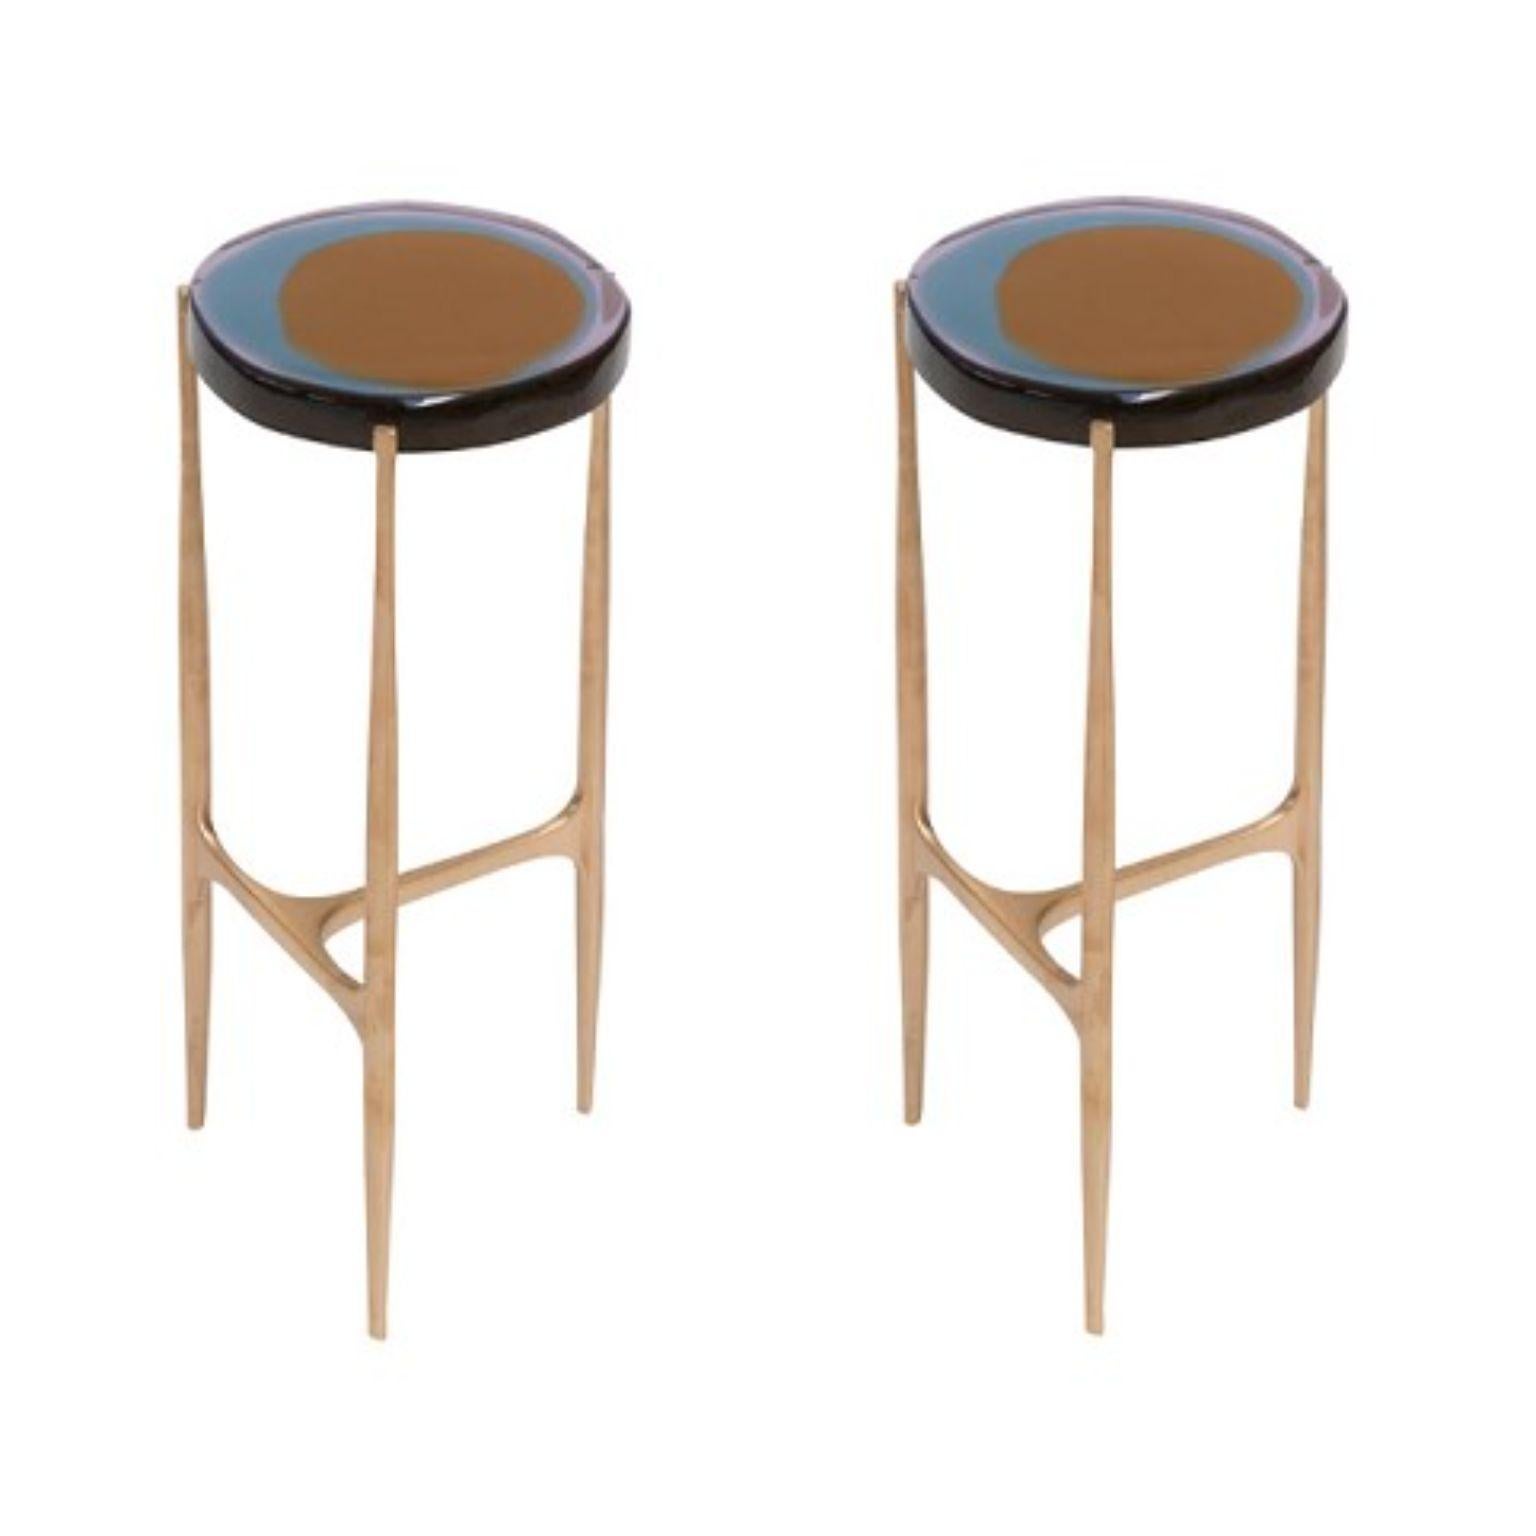 Set of 2 Agatha coffee tables by Draga & Aurel
Dimensions: W 24 x D 24 x H 56
top Ø 34 cm
Materials: Resin, bronze

The Agatha coffee tables are featured by irregular circular tops of transparent and
colorful resin sit on a bronze frame with a